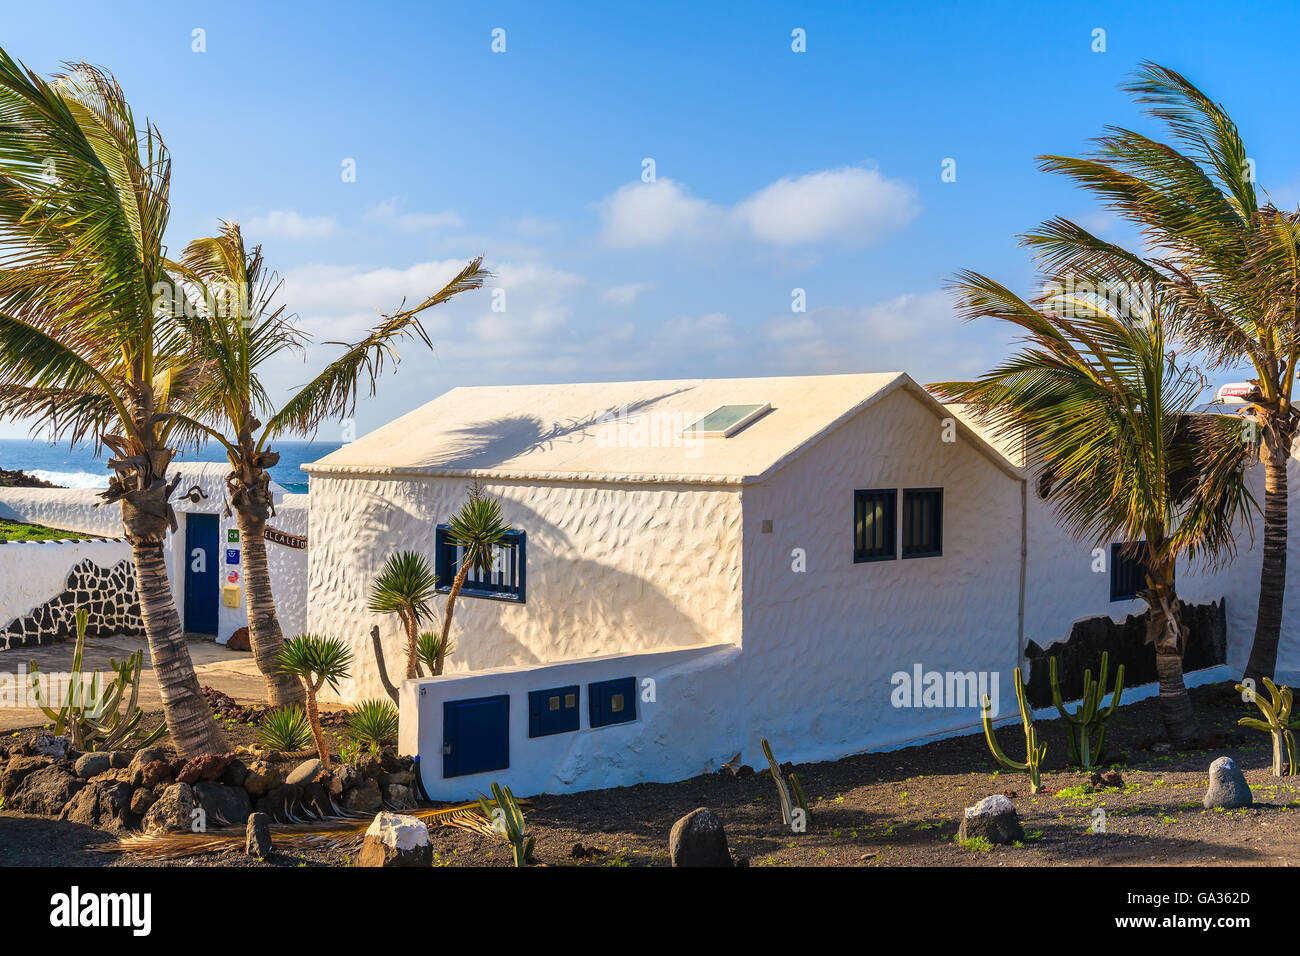 EL GOLFO BEACH, LANZAROTE ISLAND - JAN 15, 2015: Typical white house and palm tree in El Golfo village on coast of Lanzarote island, Spain. Canary Islands are popular holiday destination. Stock Photo